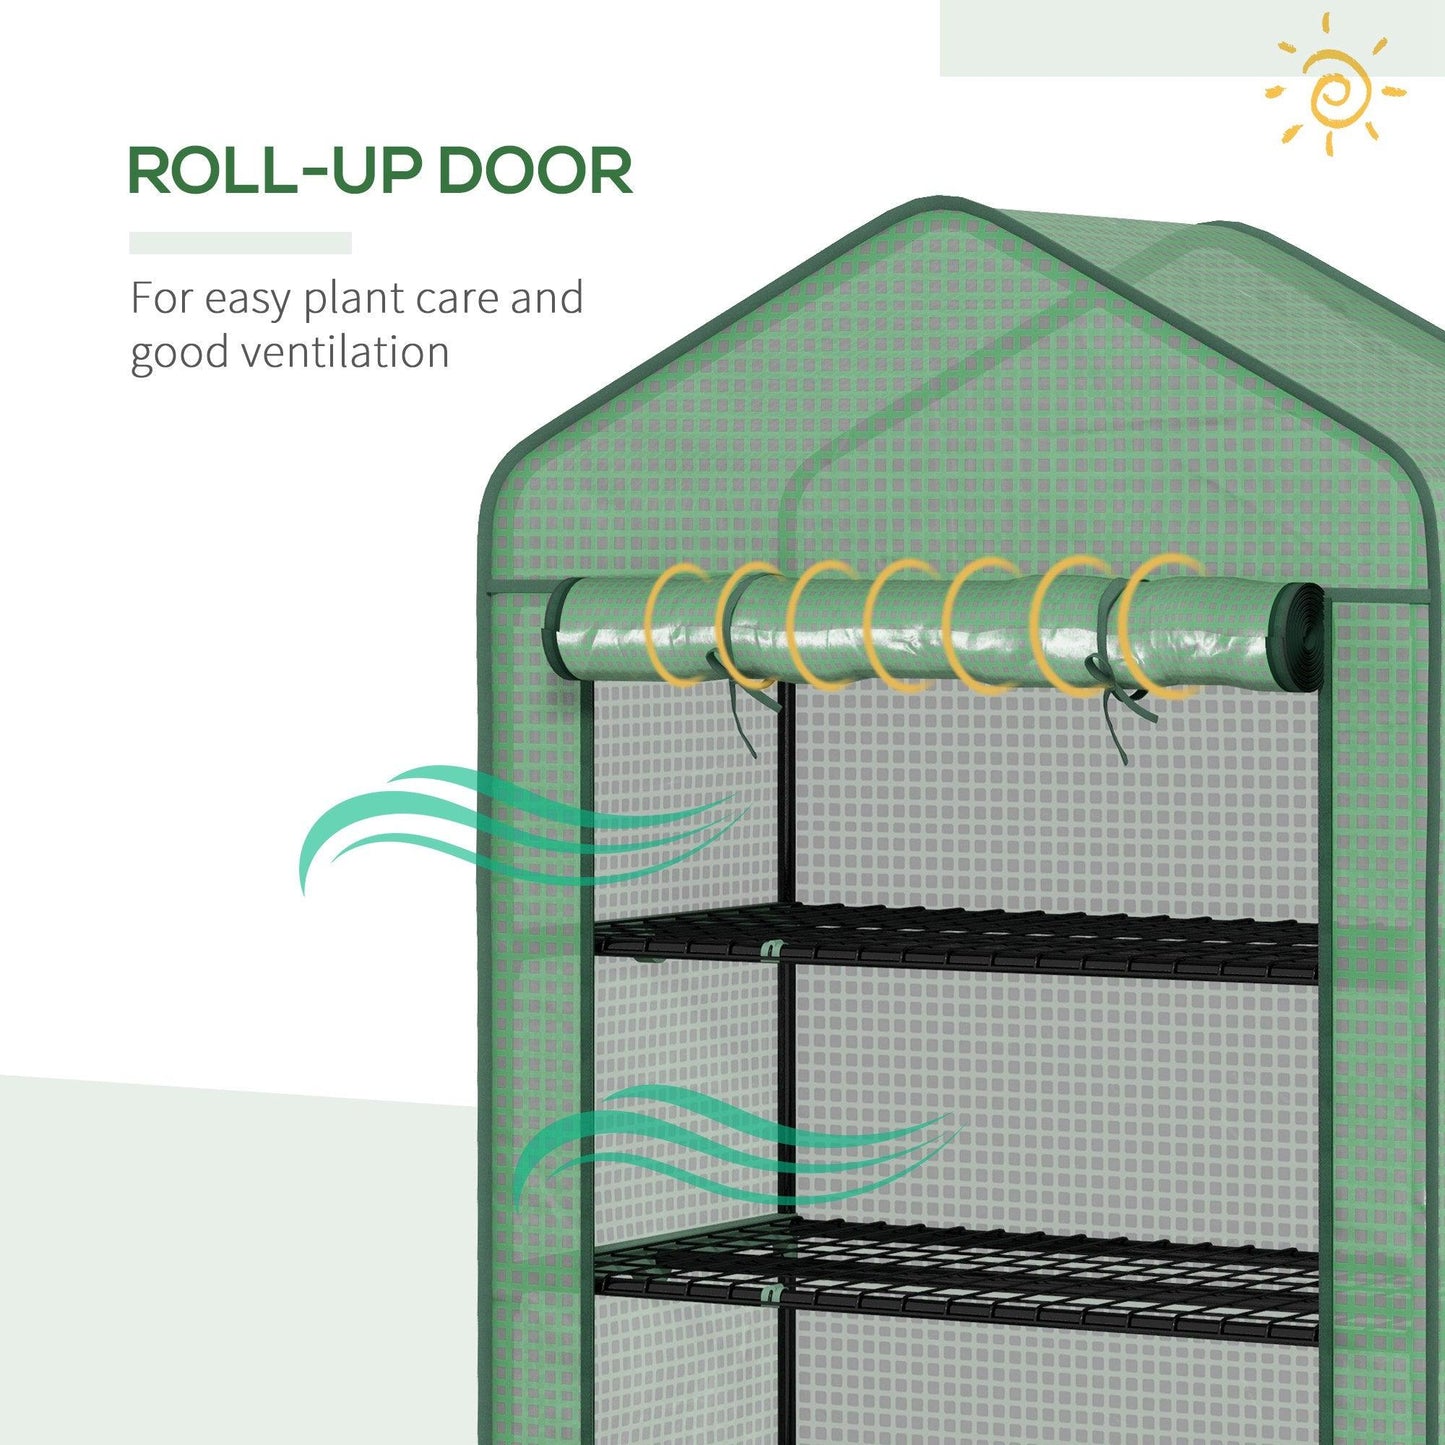 Outsunny 5 Tier Widened Mini Greenhouse w/ Reinforced PE Cover, Portable Green House w/ Roll-up Door & Wire Shelves, 193H x 90W x 49Dcm, Green - ALL4U RETAILER LTD